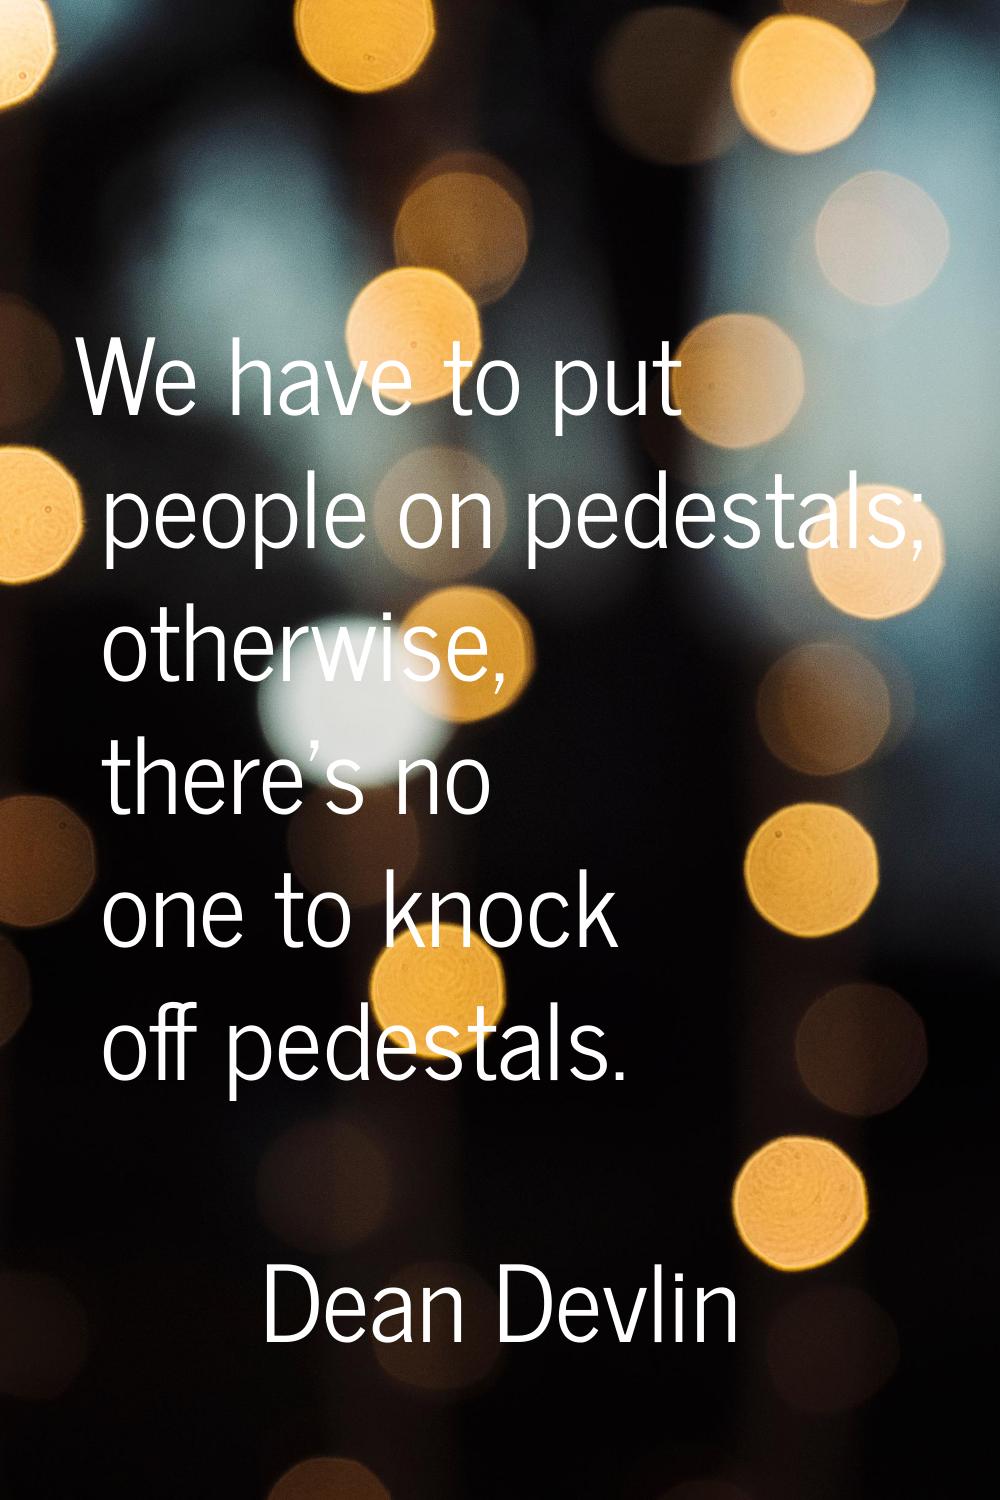 We have to put people on pedestals; otherwise, there's no one to knock off pedestals.